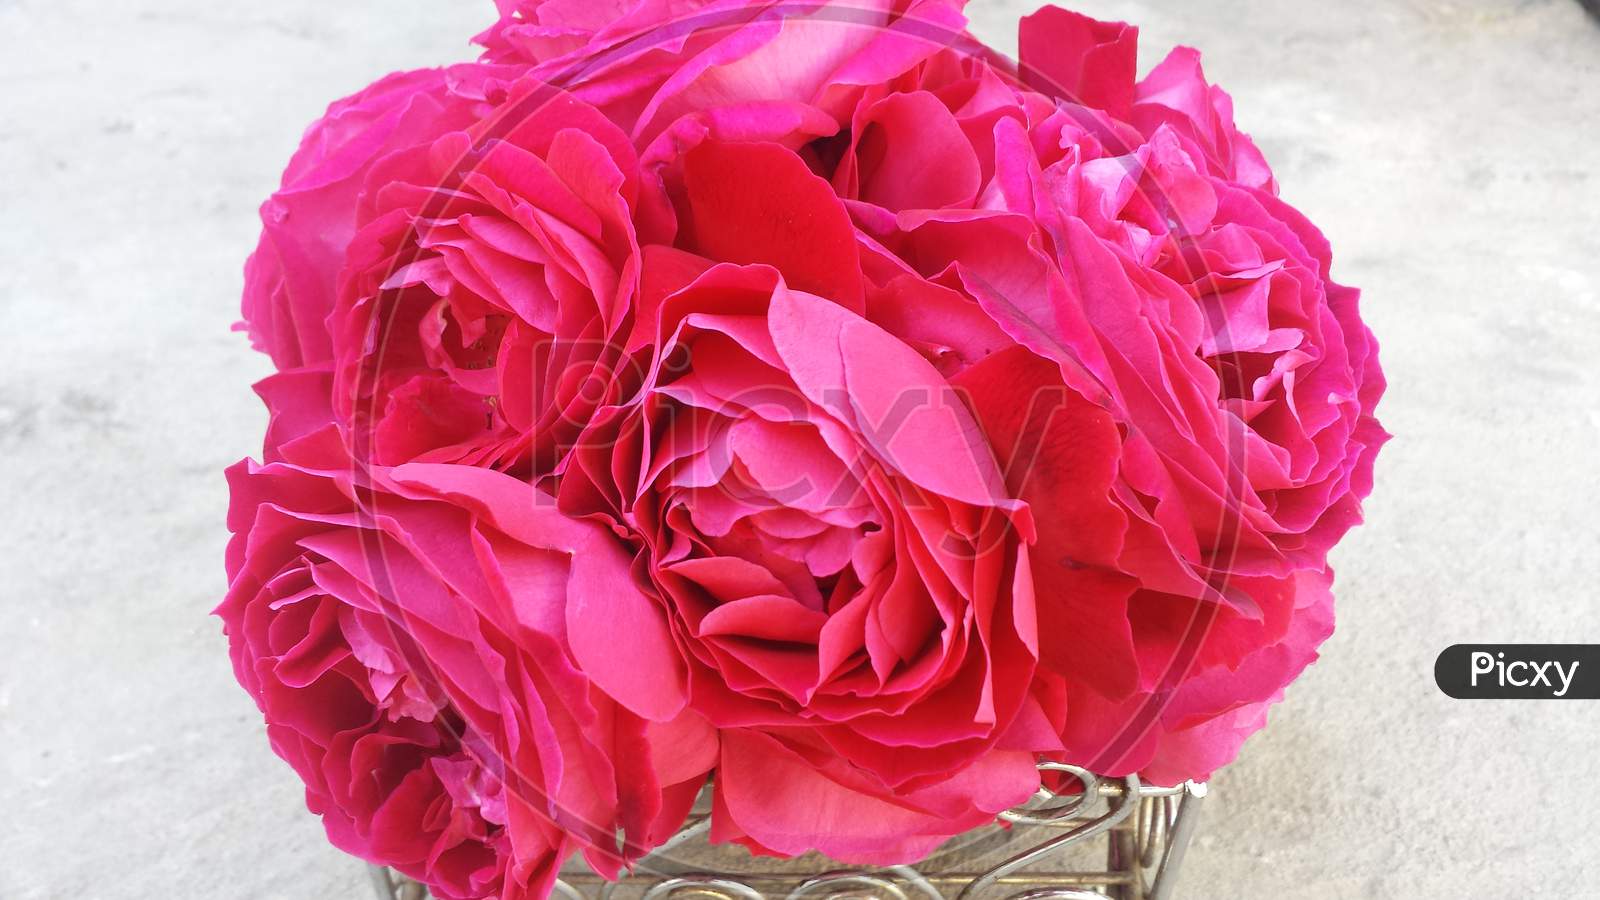 Pink roses bouquet in flowers pot, in spring season